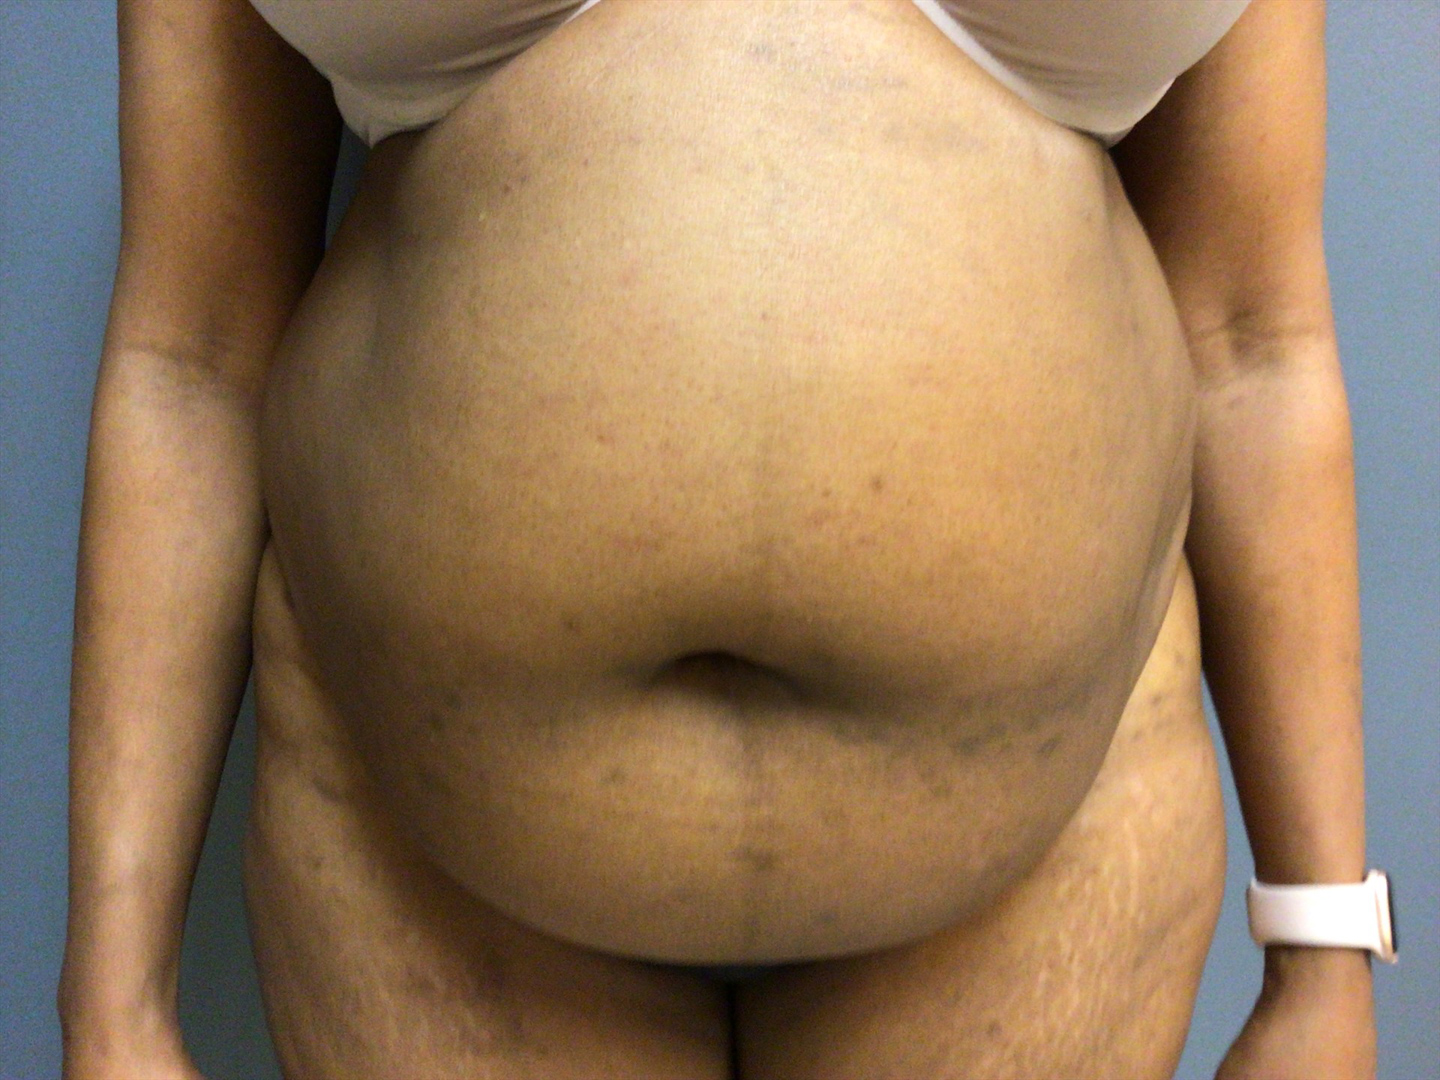 53 year old female before surgery